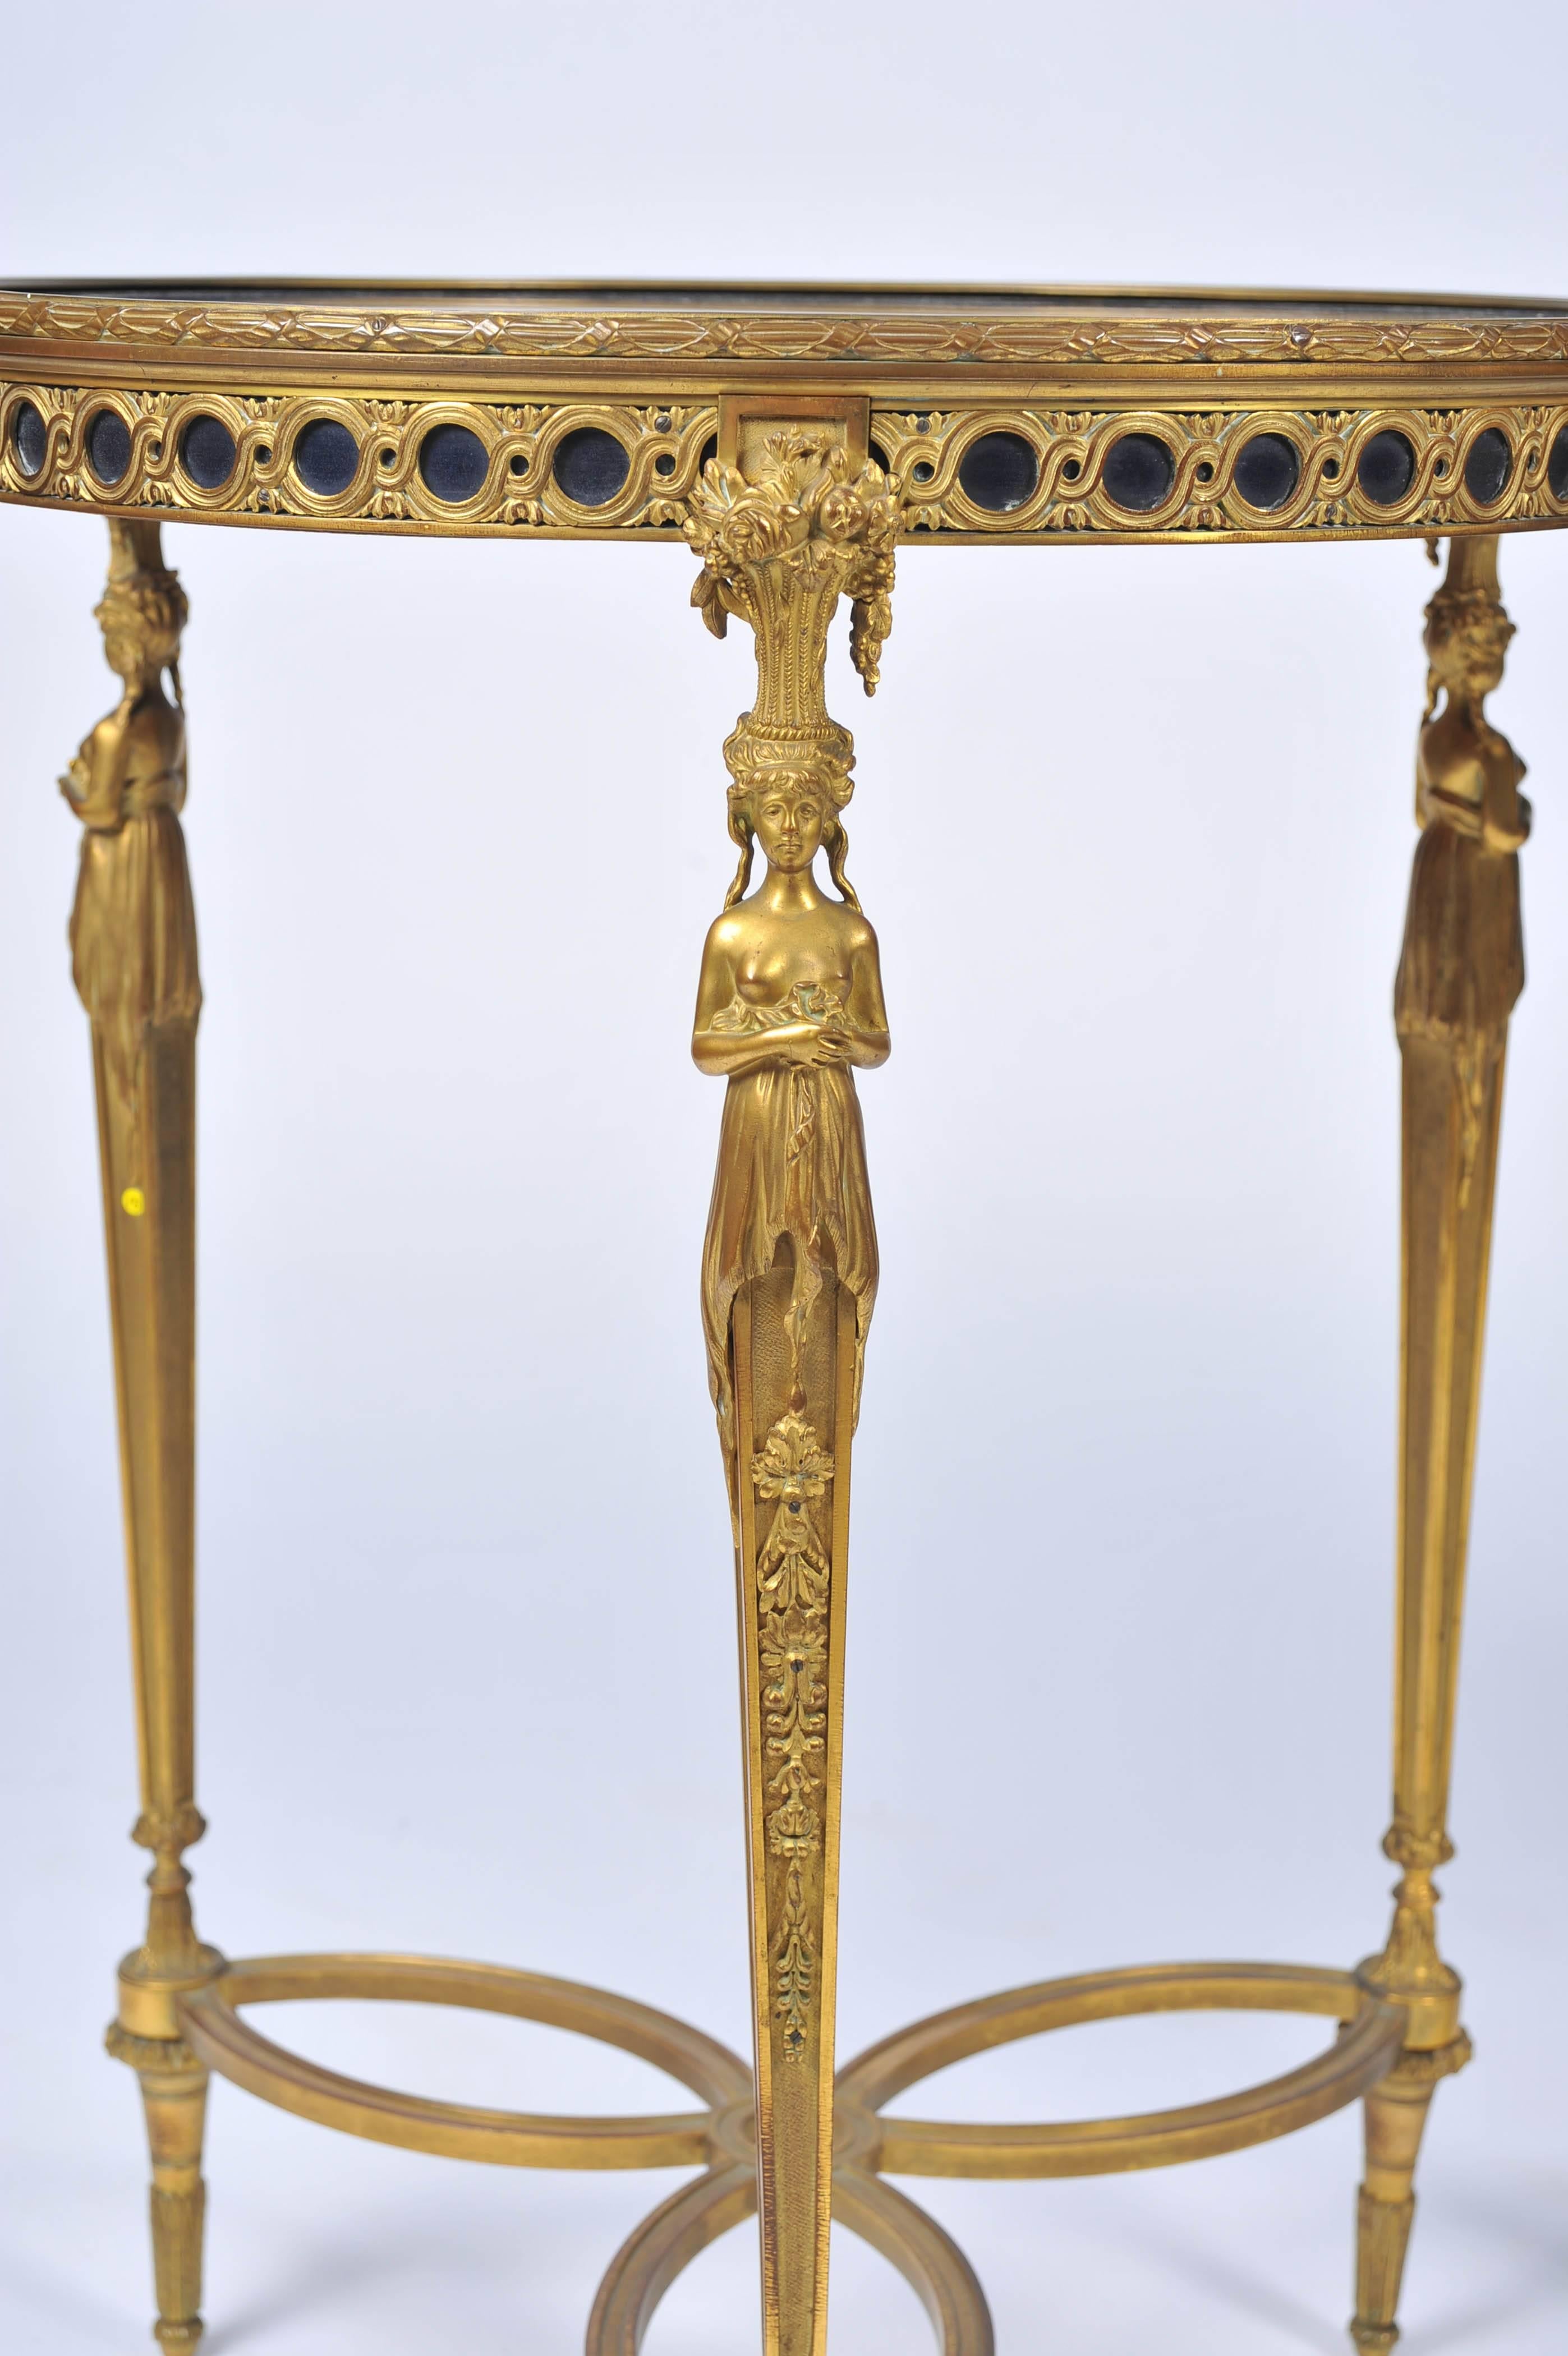 A very good quality pair of French gilded ormolu Louis XVI style occasional tables, in the manner of Adam Weisweiller, having Lapis lazuli tops, three monopodia supports to the lattice work frieze and a stretcher beneath.